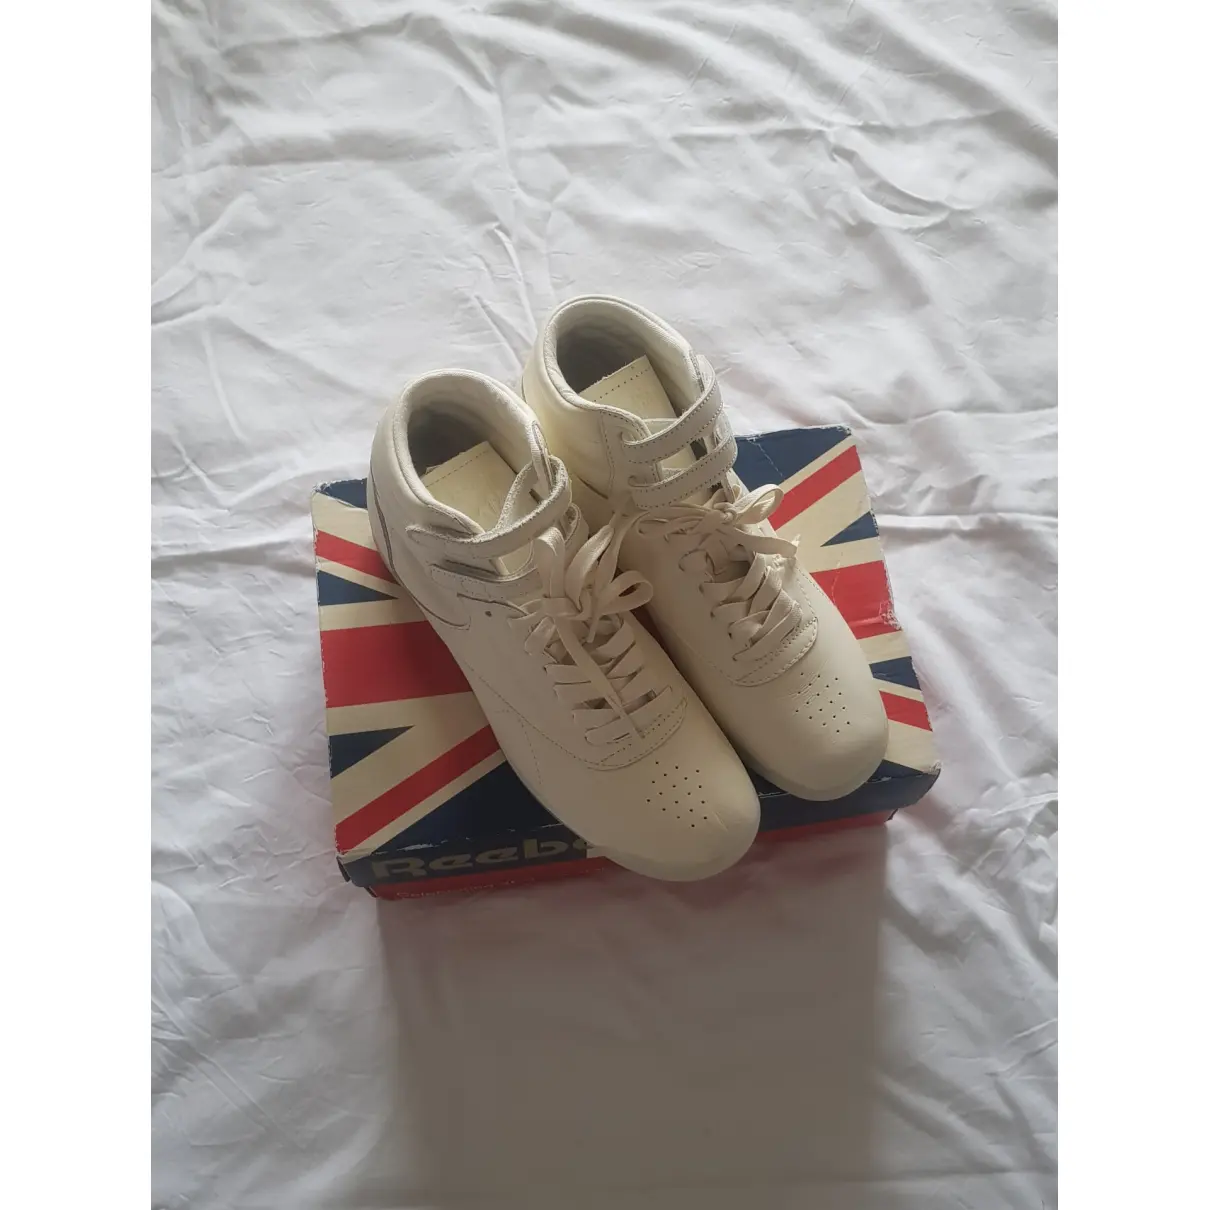 Buy Reebok Leather trainers online